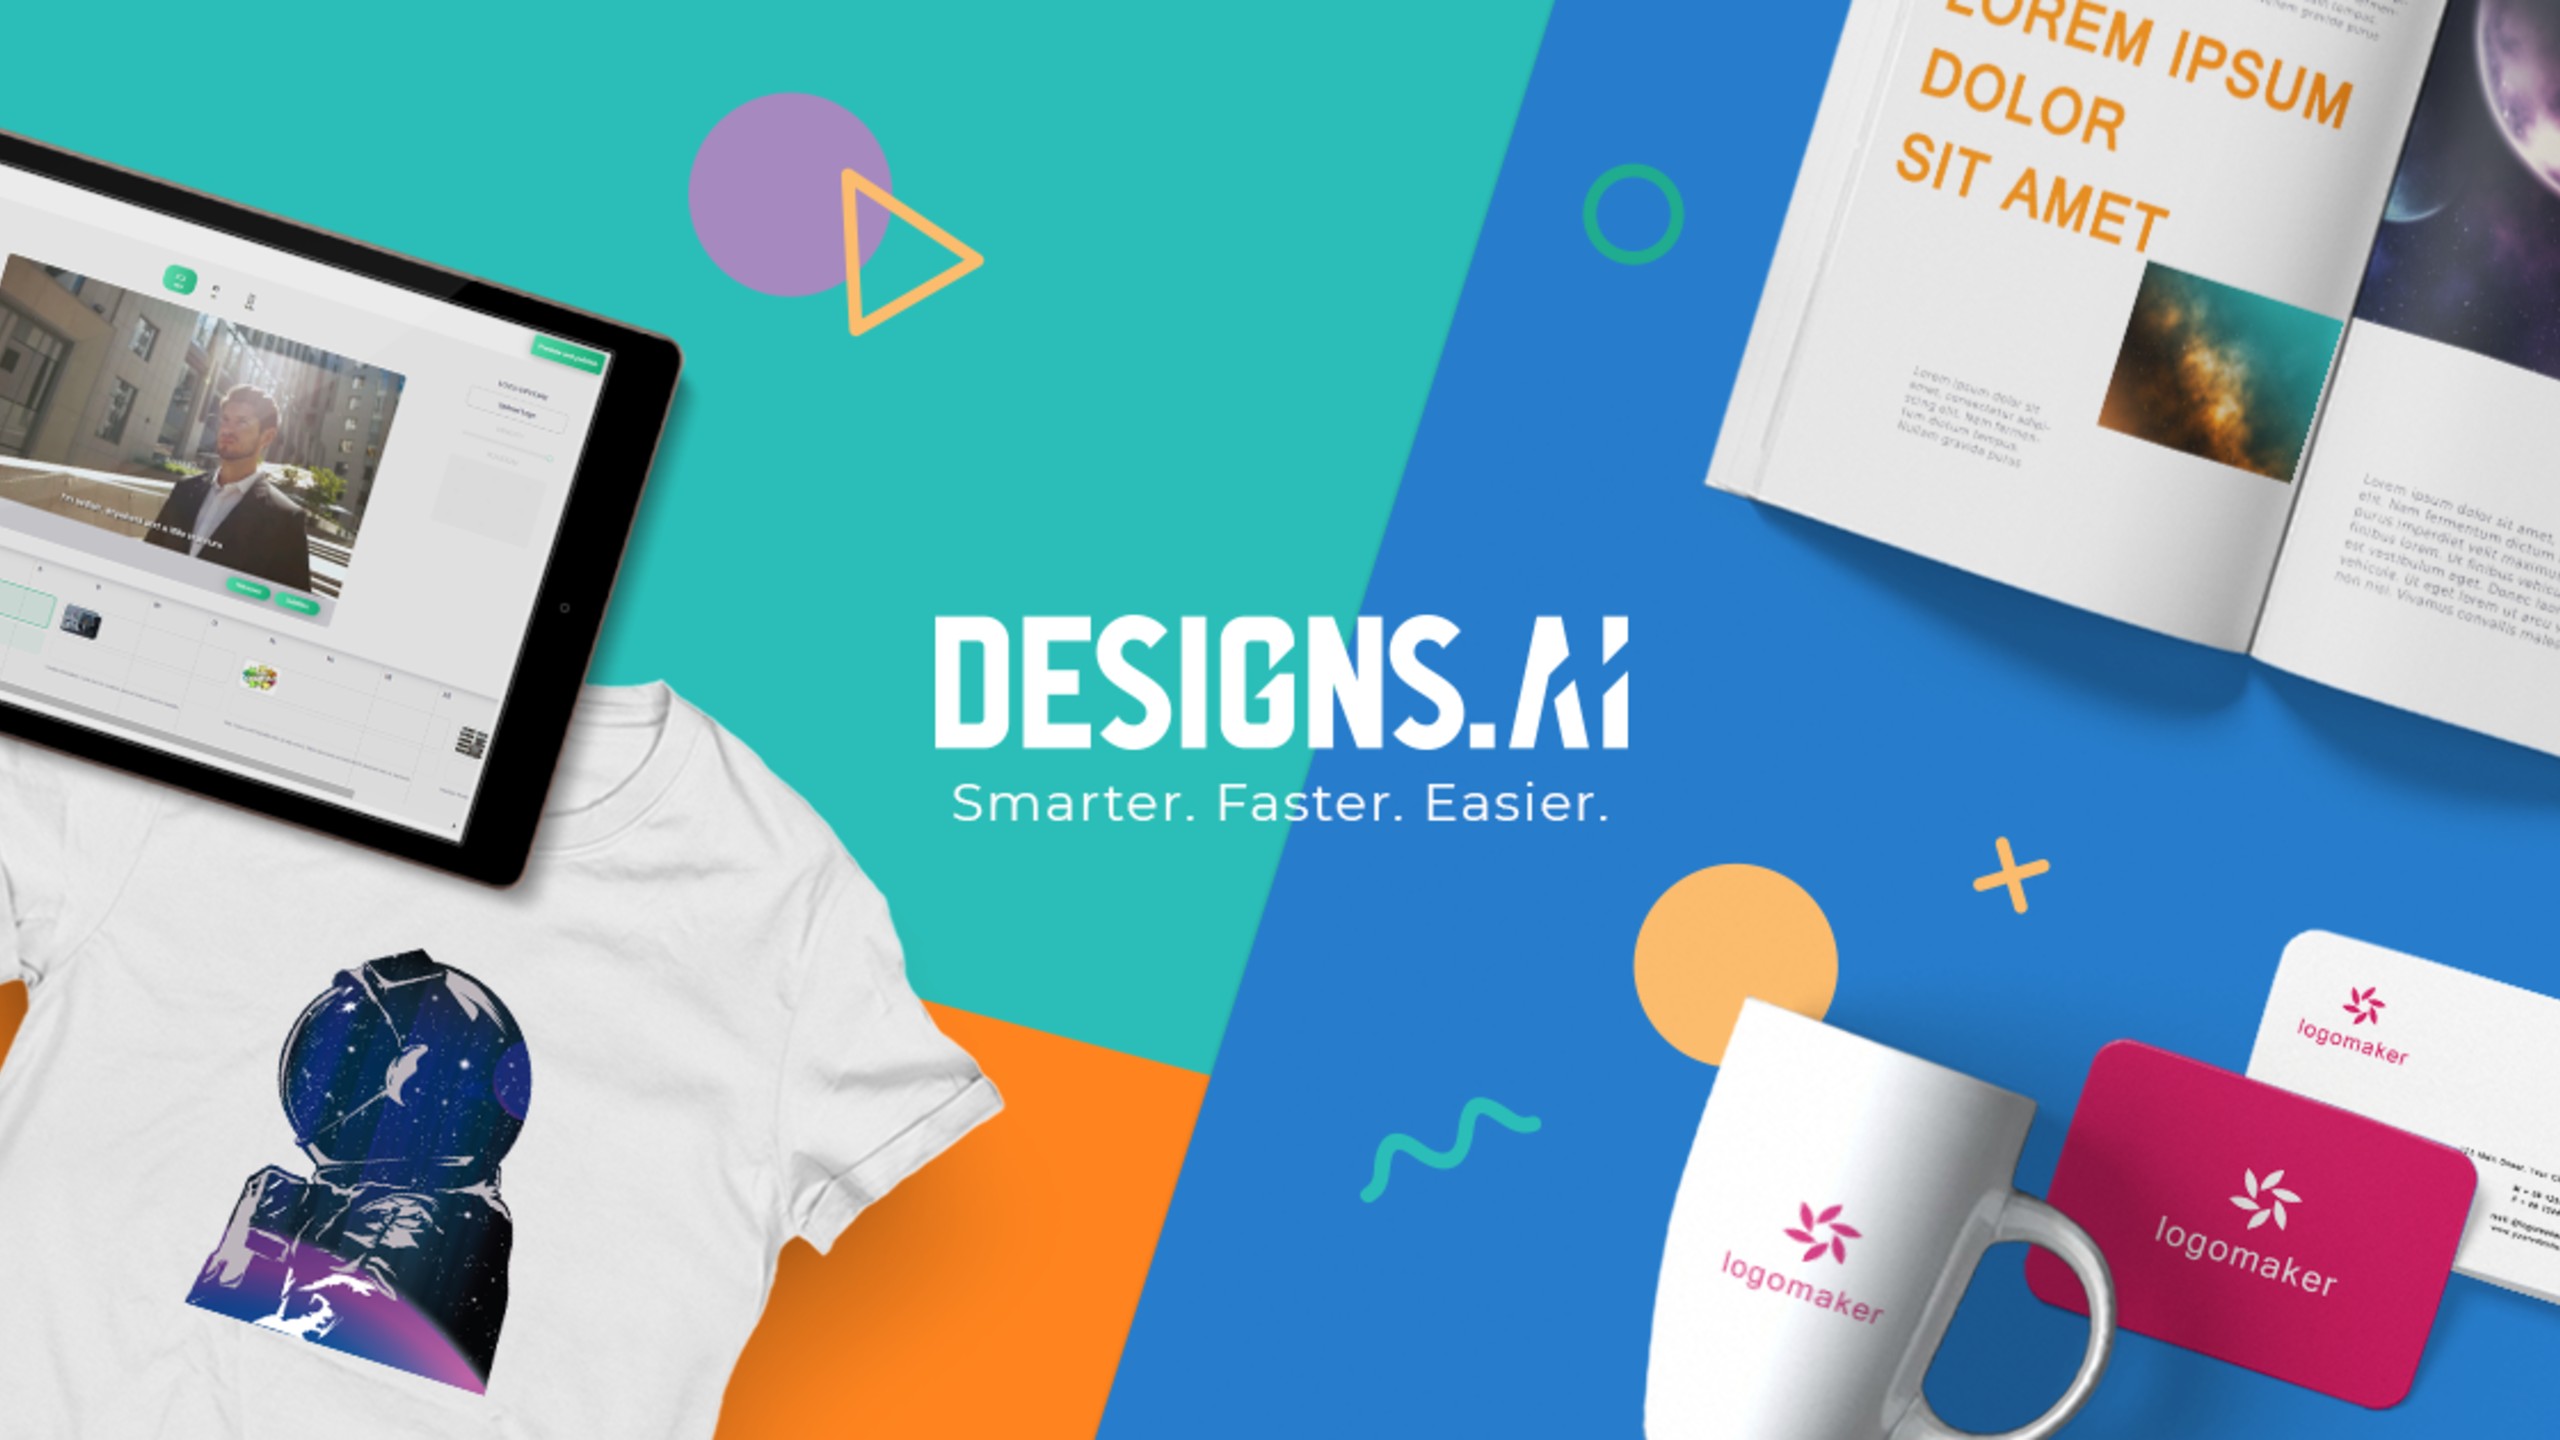 Designs.ai - Create logos, videos, banners, mockups with AI in 2 minutes